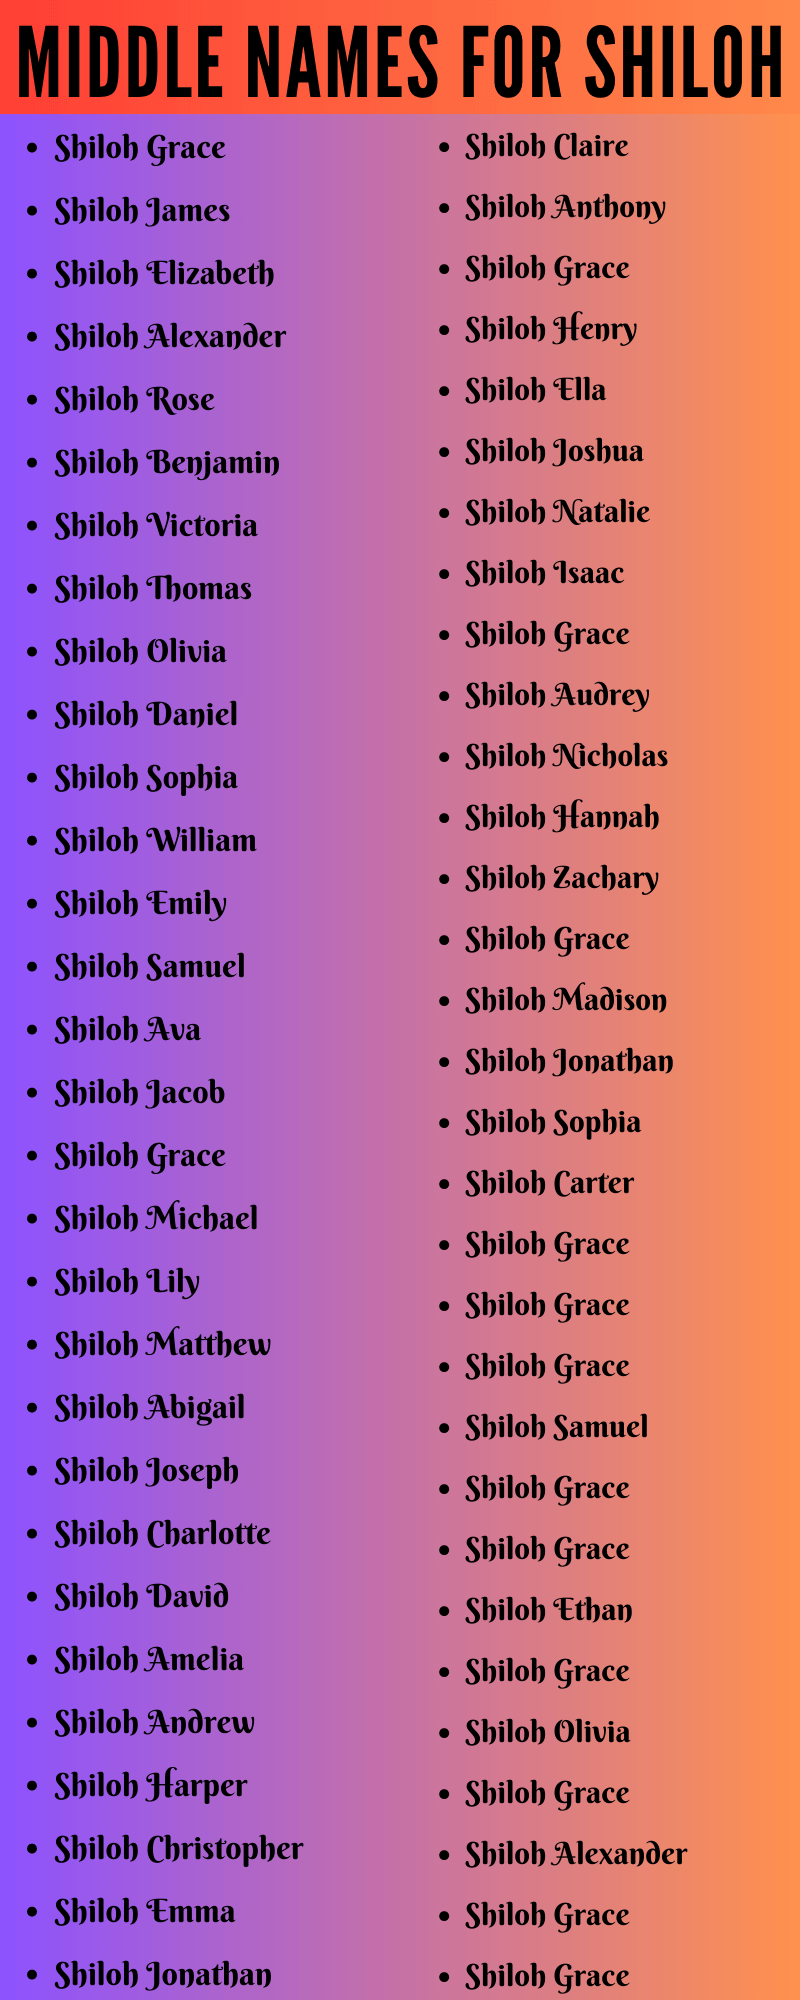 400 Creative Middle Names For Shiloh